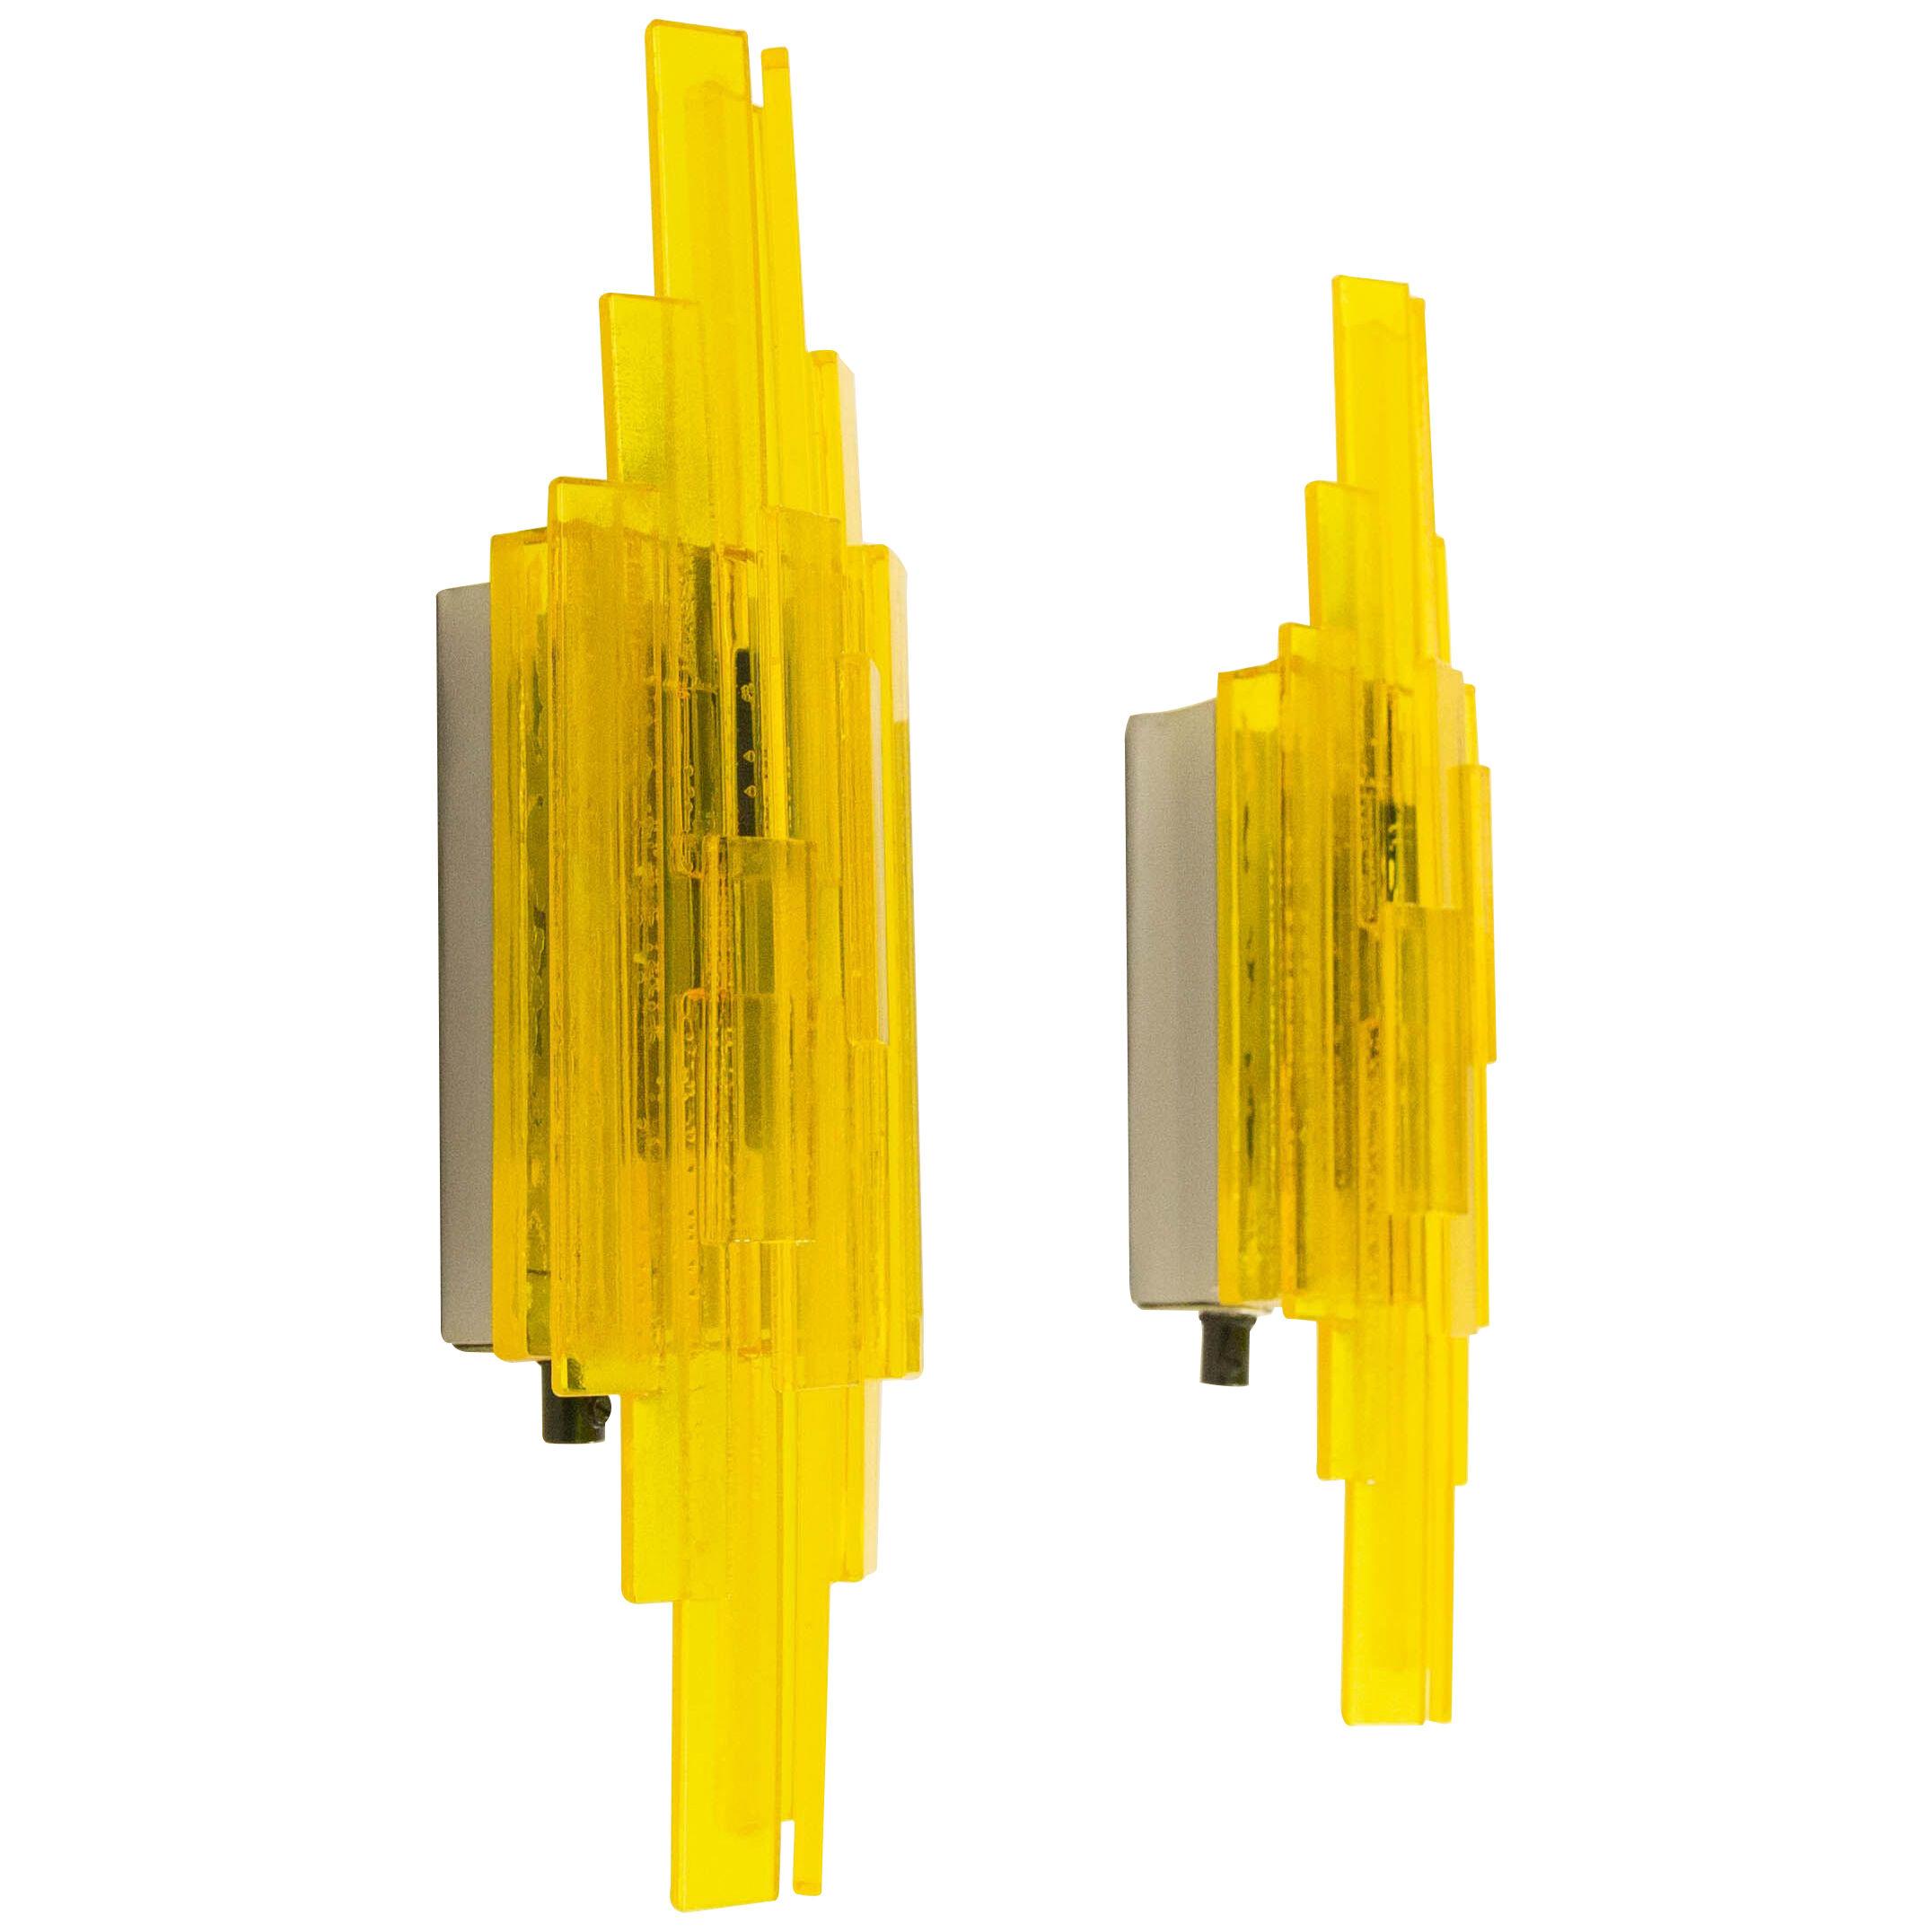 Pair of yellow acrylic wall lamps by Claus Bolby for Cebo Industri, 1960s